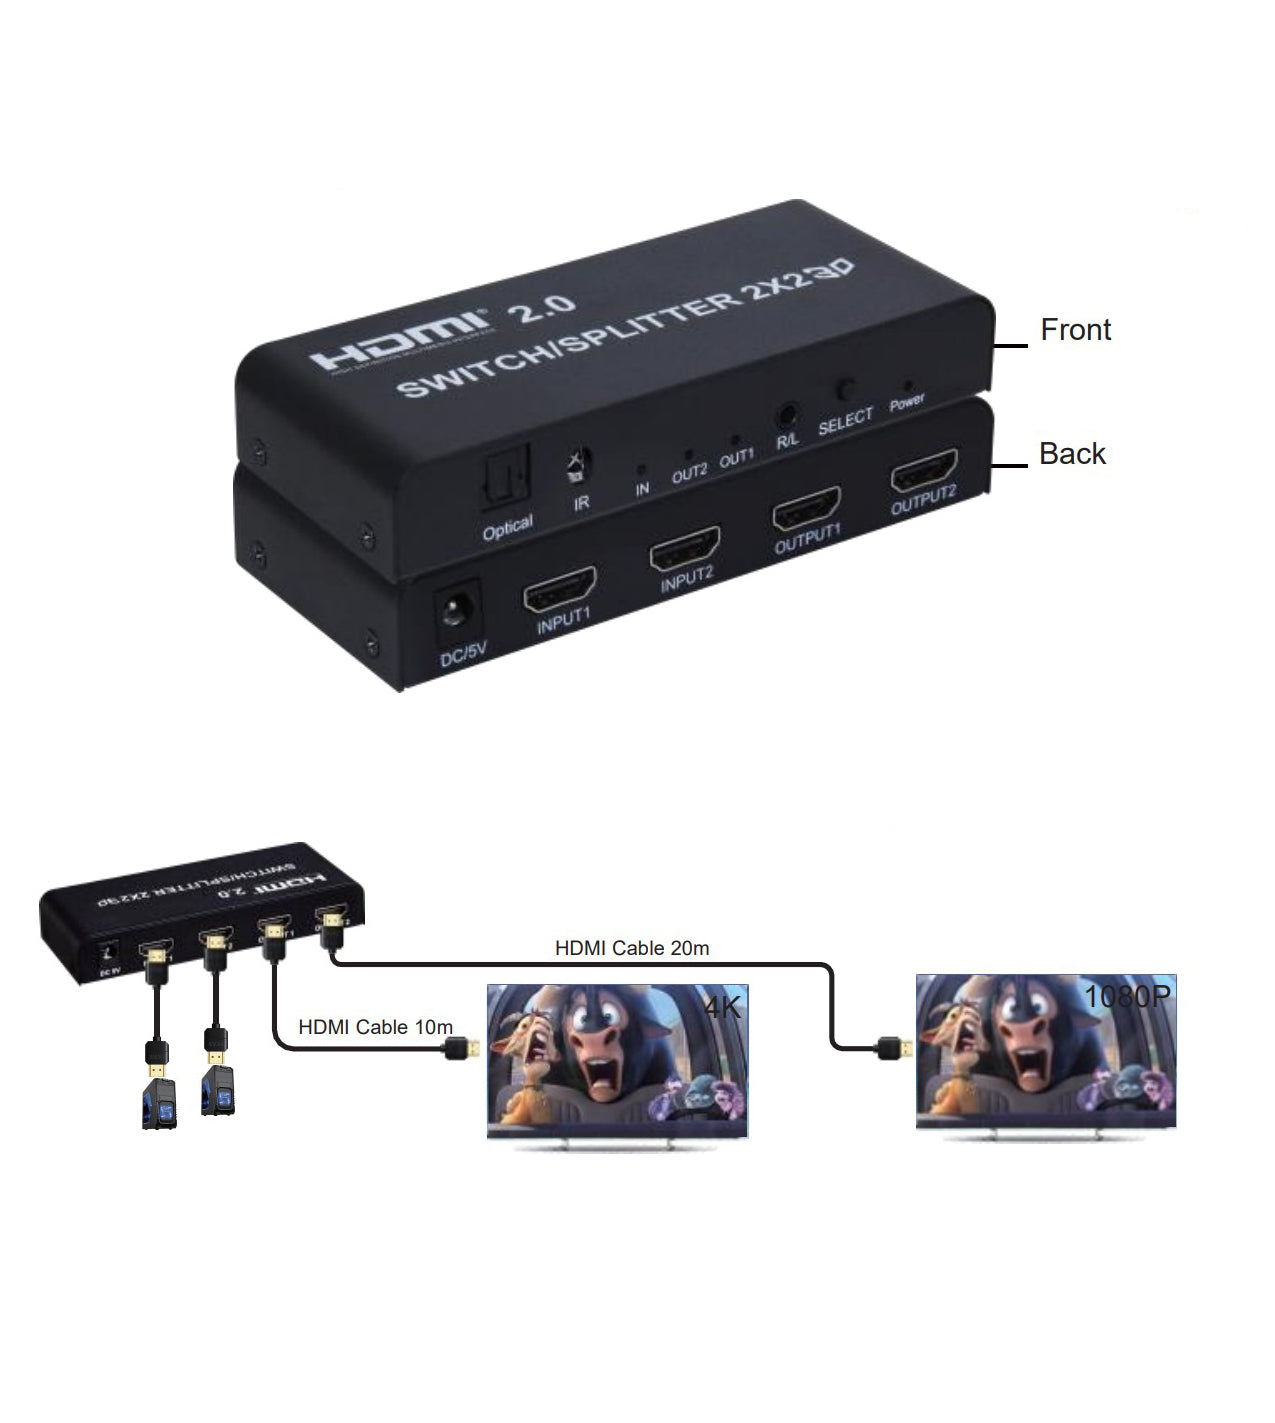 ArgoX HDSS2-2-V2.0 4K 60Hz HDMI 2.0 Splitter Switcher 2x2 Audio Extractor with IR Remote Control, Supports 3D, 6Gbps Data Rate and 600MHz Max Bandwidth, High-Definition RGB/YUV, and Up to 20m Transmission Distance